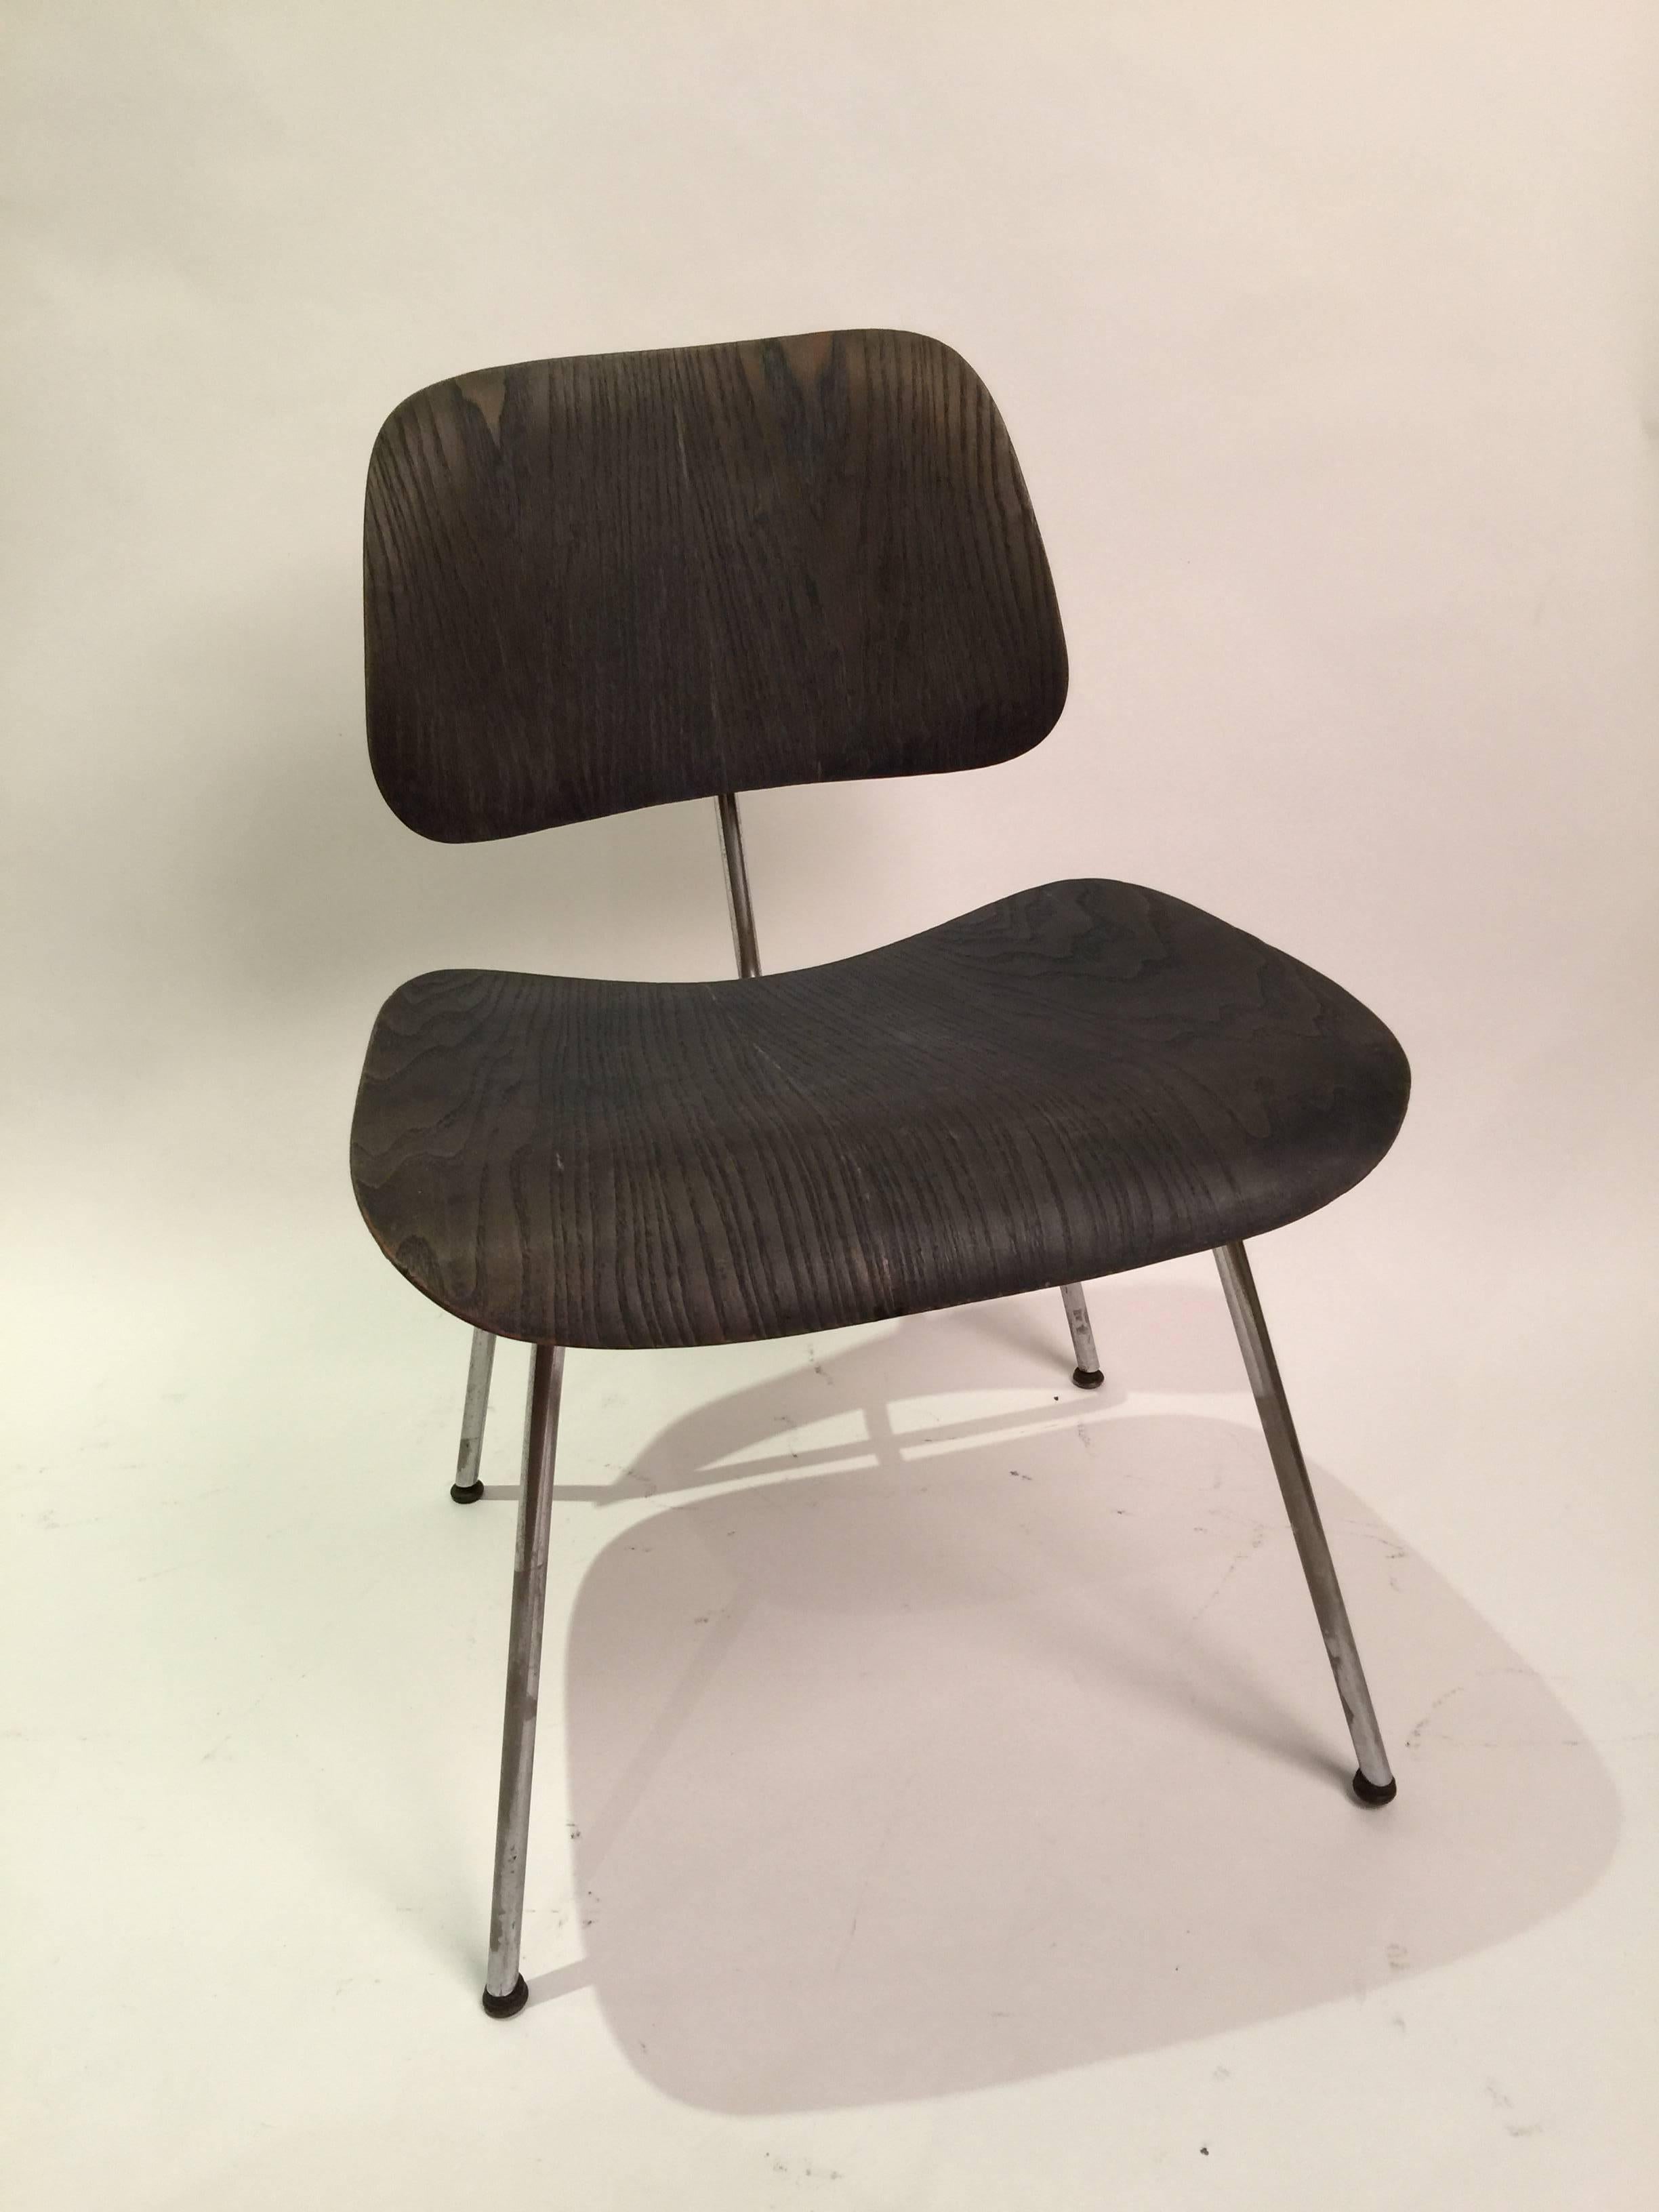 Pair of black aniline DCM dining chairs by Charles and Ray Eames. These first edition chairs were produced by Evans manufacturing and distributed by Herman Miller. Both chairs have labels intact. One chair shows some additional signs of use and has